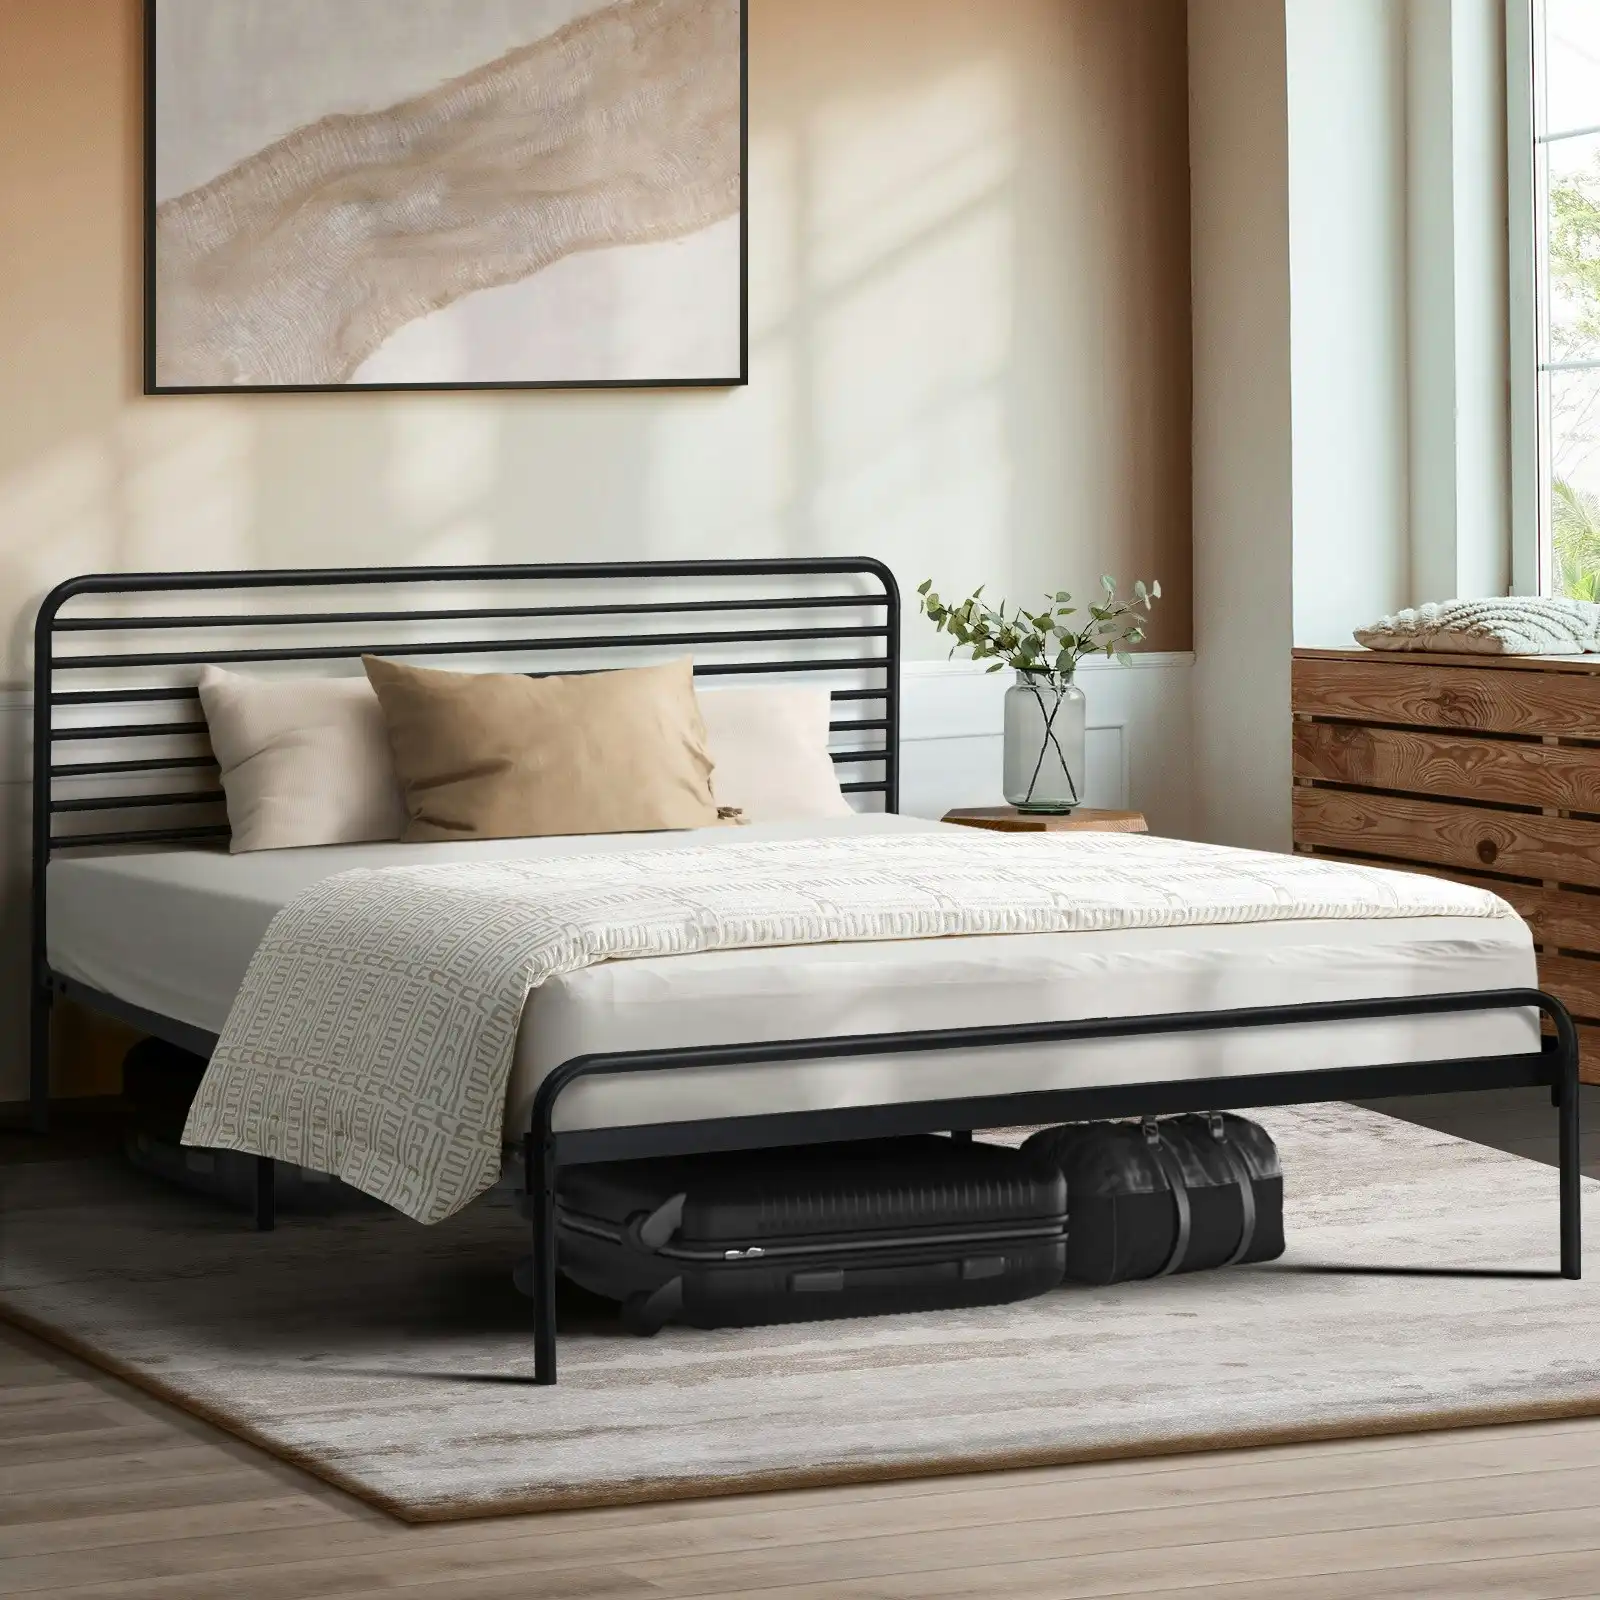 Oikiture Metal Bed Frame Double Size Beds Platform